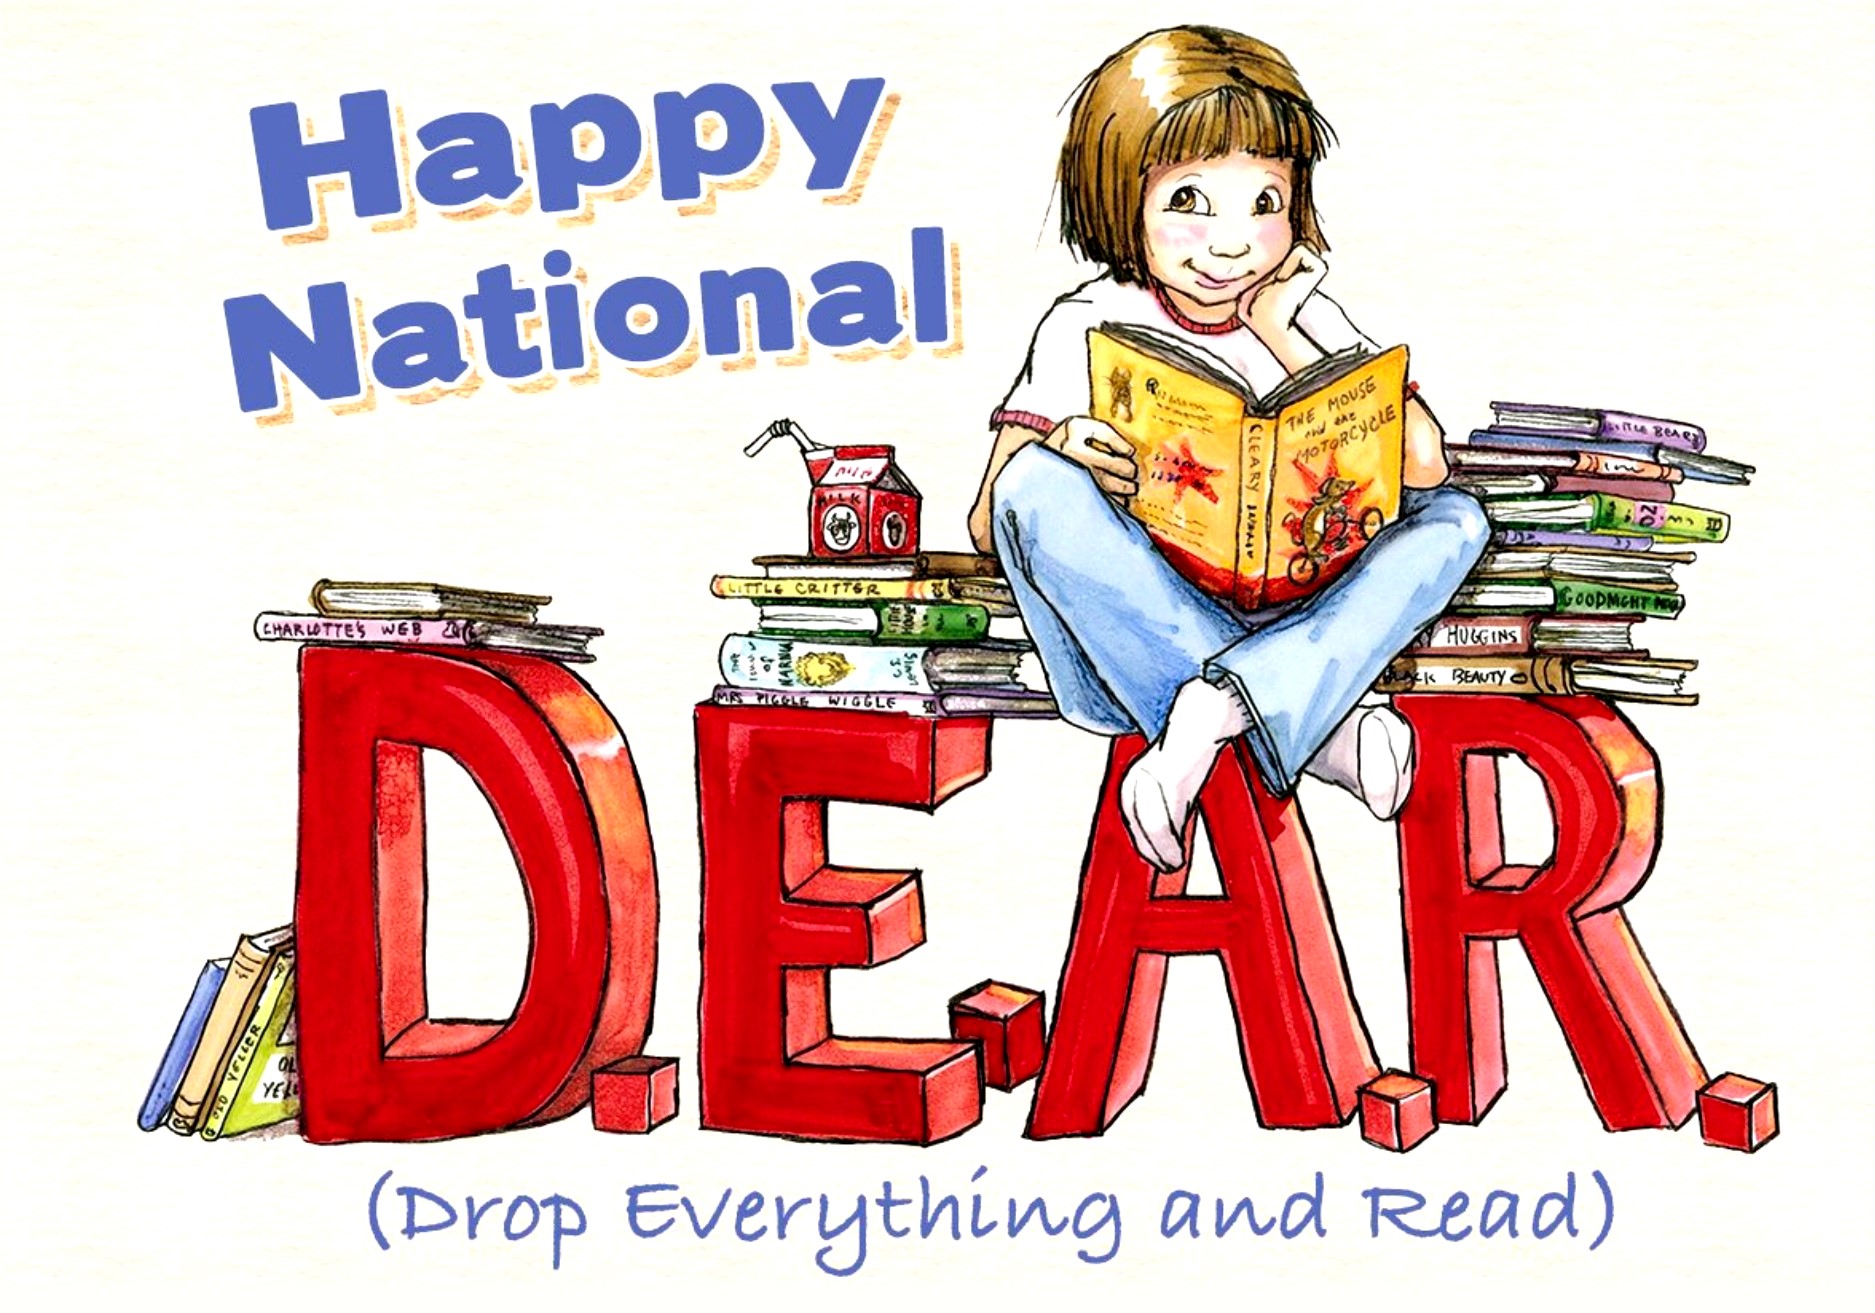 D.E.A.R. Drop Everything And Read